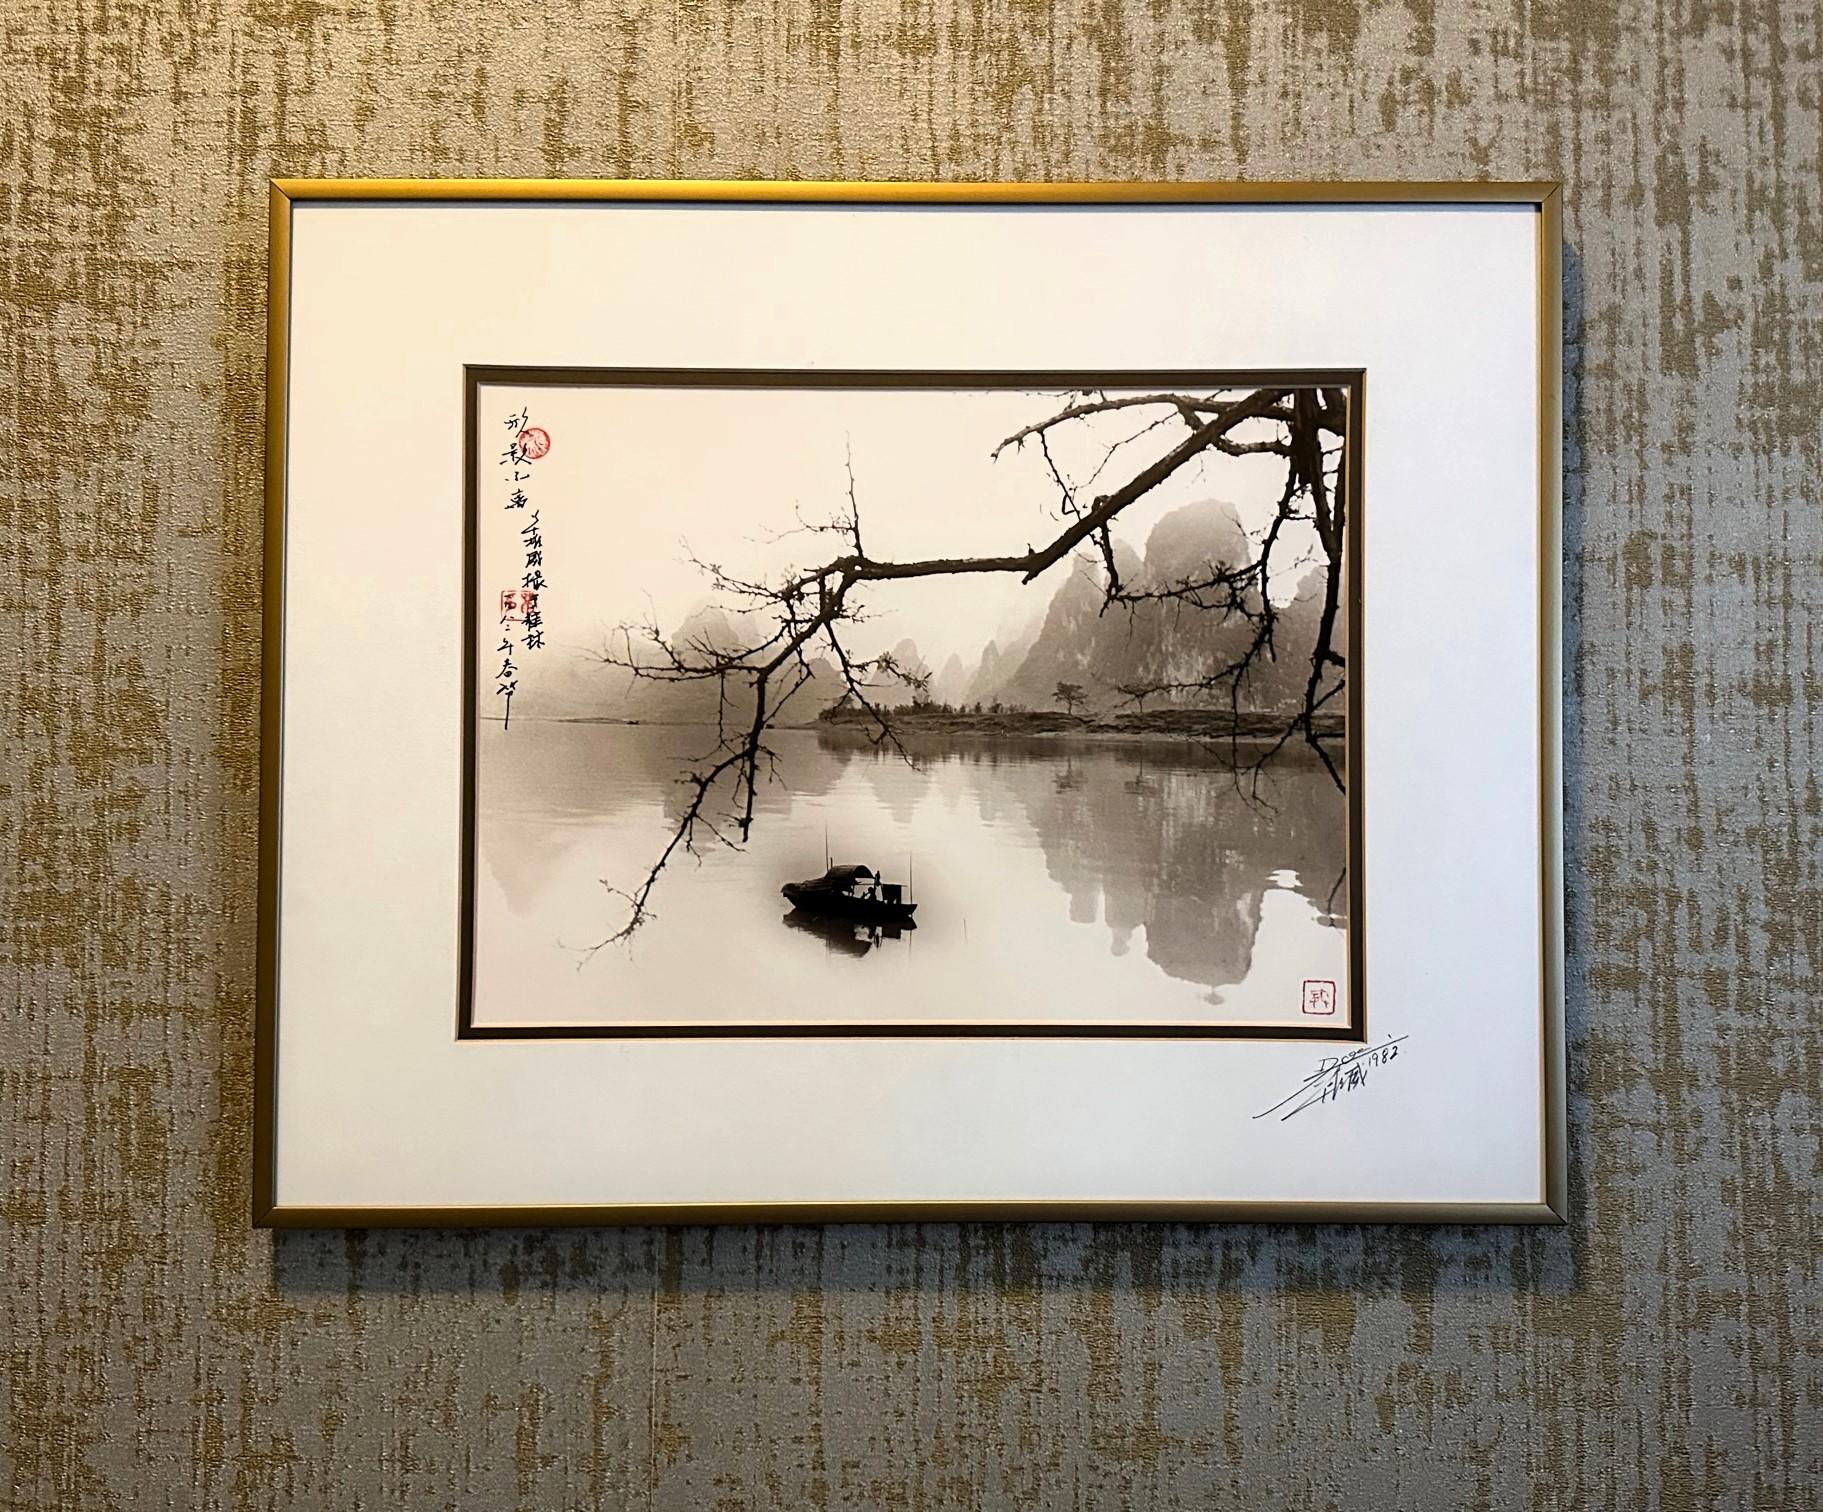 Framed Landscape Photograph by Don Hong Oai For Sale 4